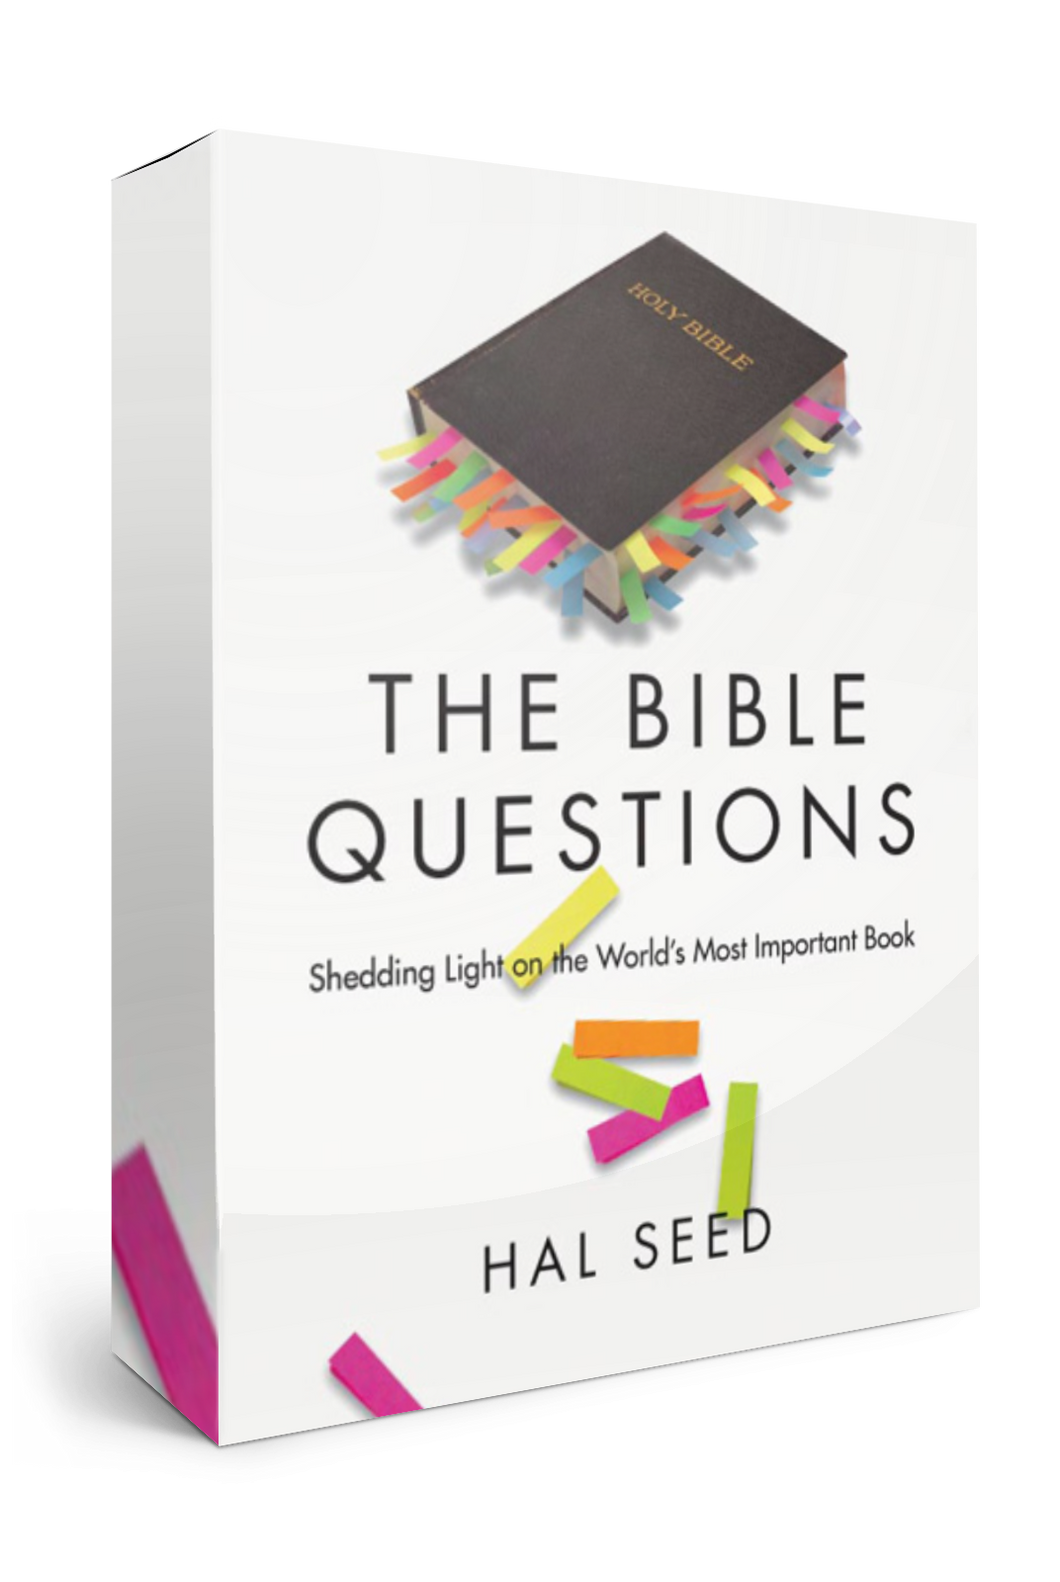 The Bible Questions Campaign Kit